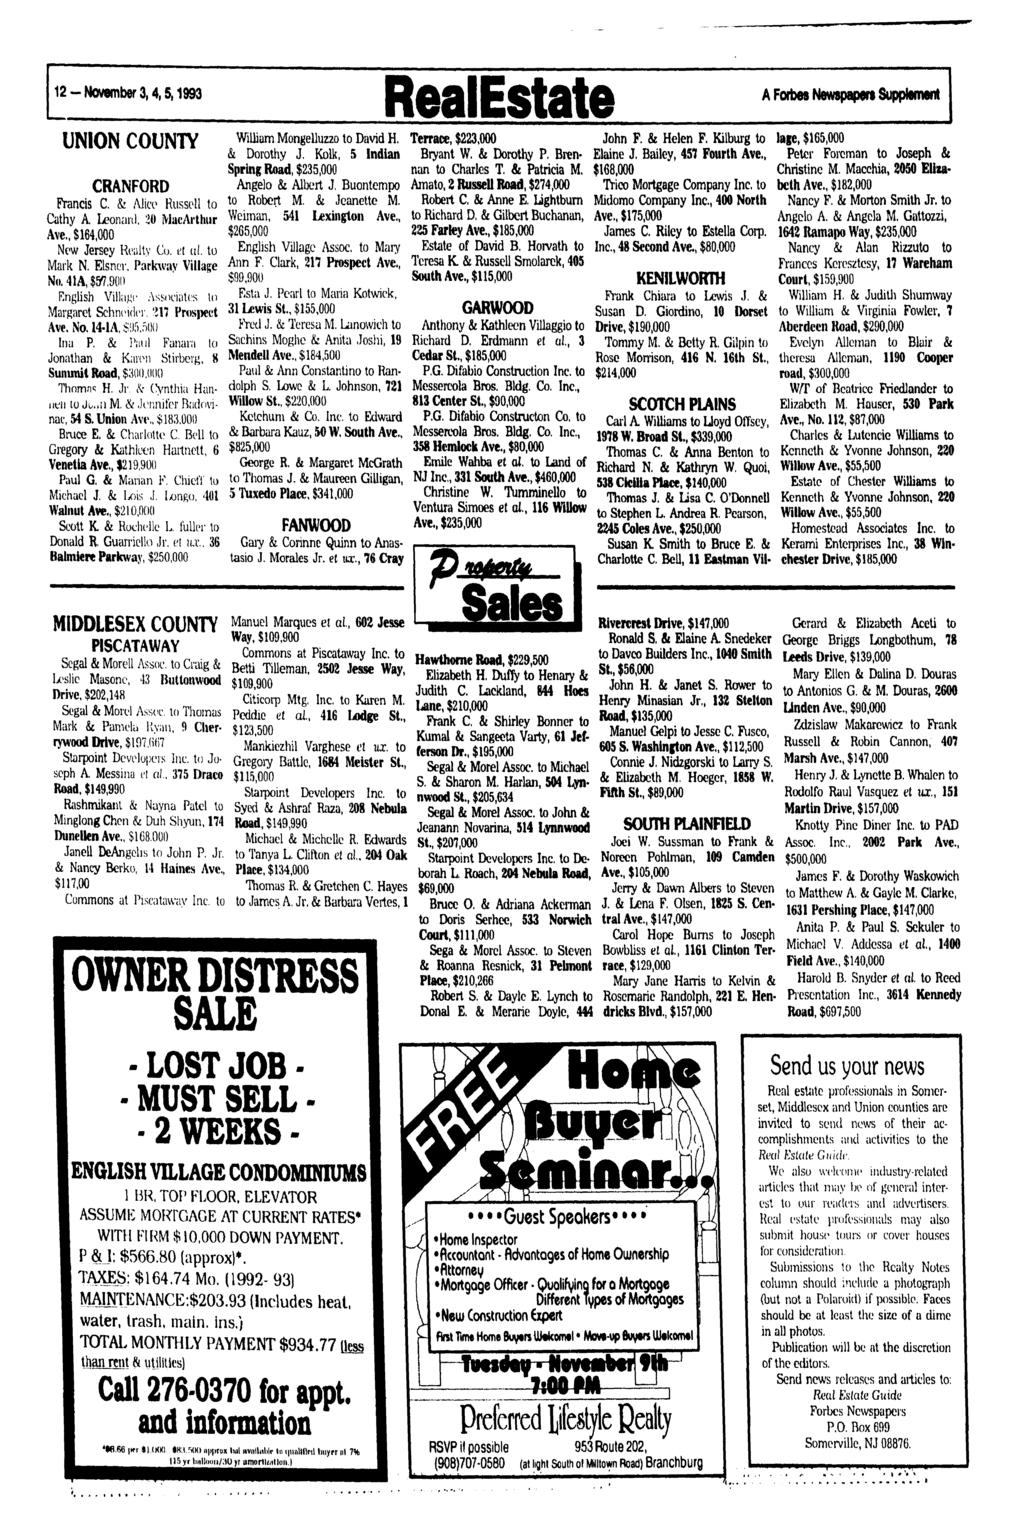 12 - November 3,4,5,1993 RealEstate A Forbes Newspaper! Supplement UNION COUNTY CRANFORD Francis C. & Alicv Russell to Cathy A Leonard, 20 MacArthur Ave., $164,000 New Jersey Realty Co.